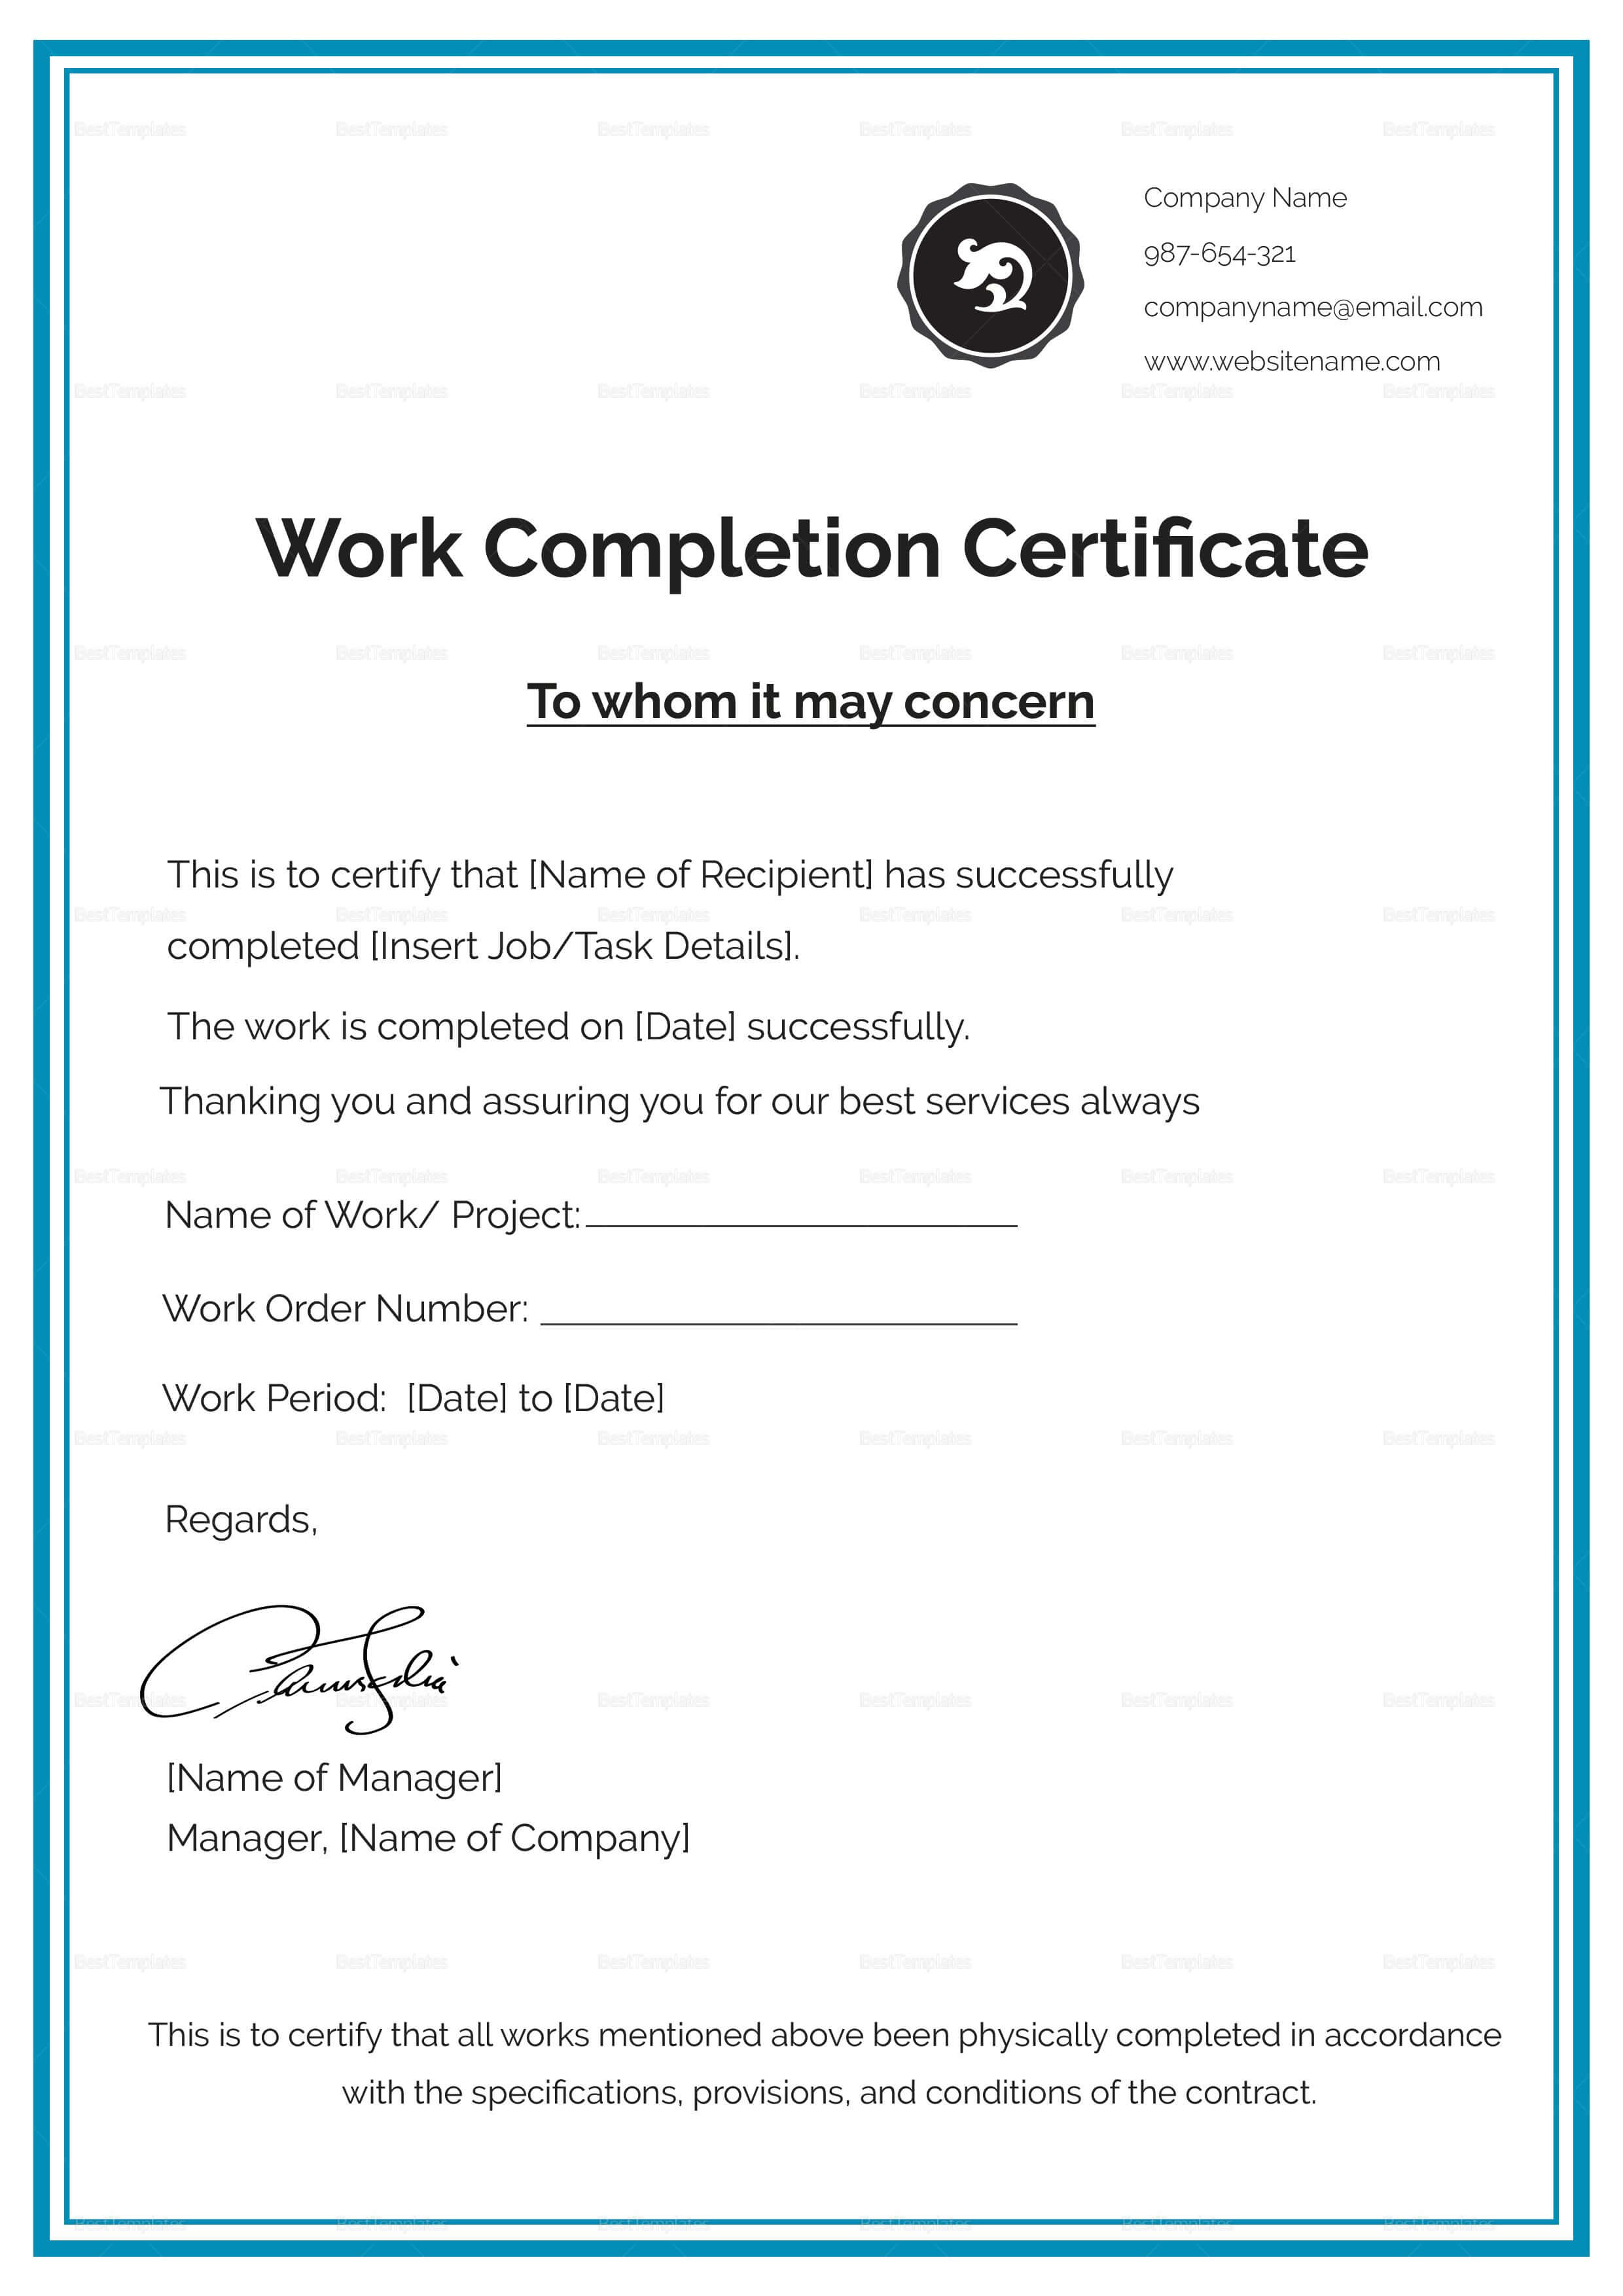 Pinadil Khan On Job In 2019 | Certificate Templates Pertaining To Jct Practical Completion Certificate Template